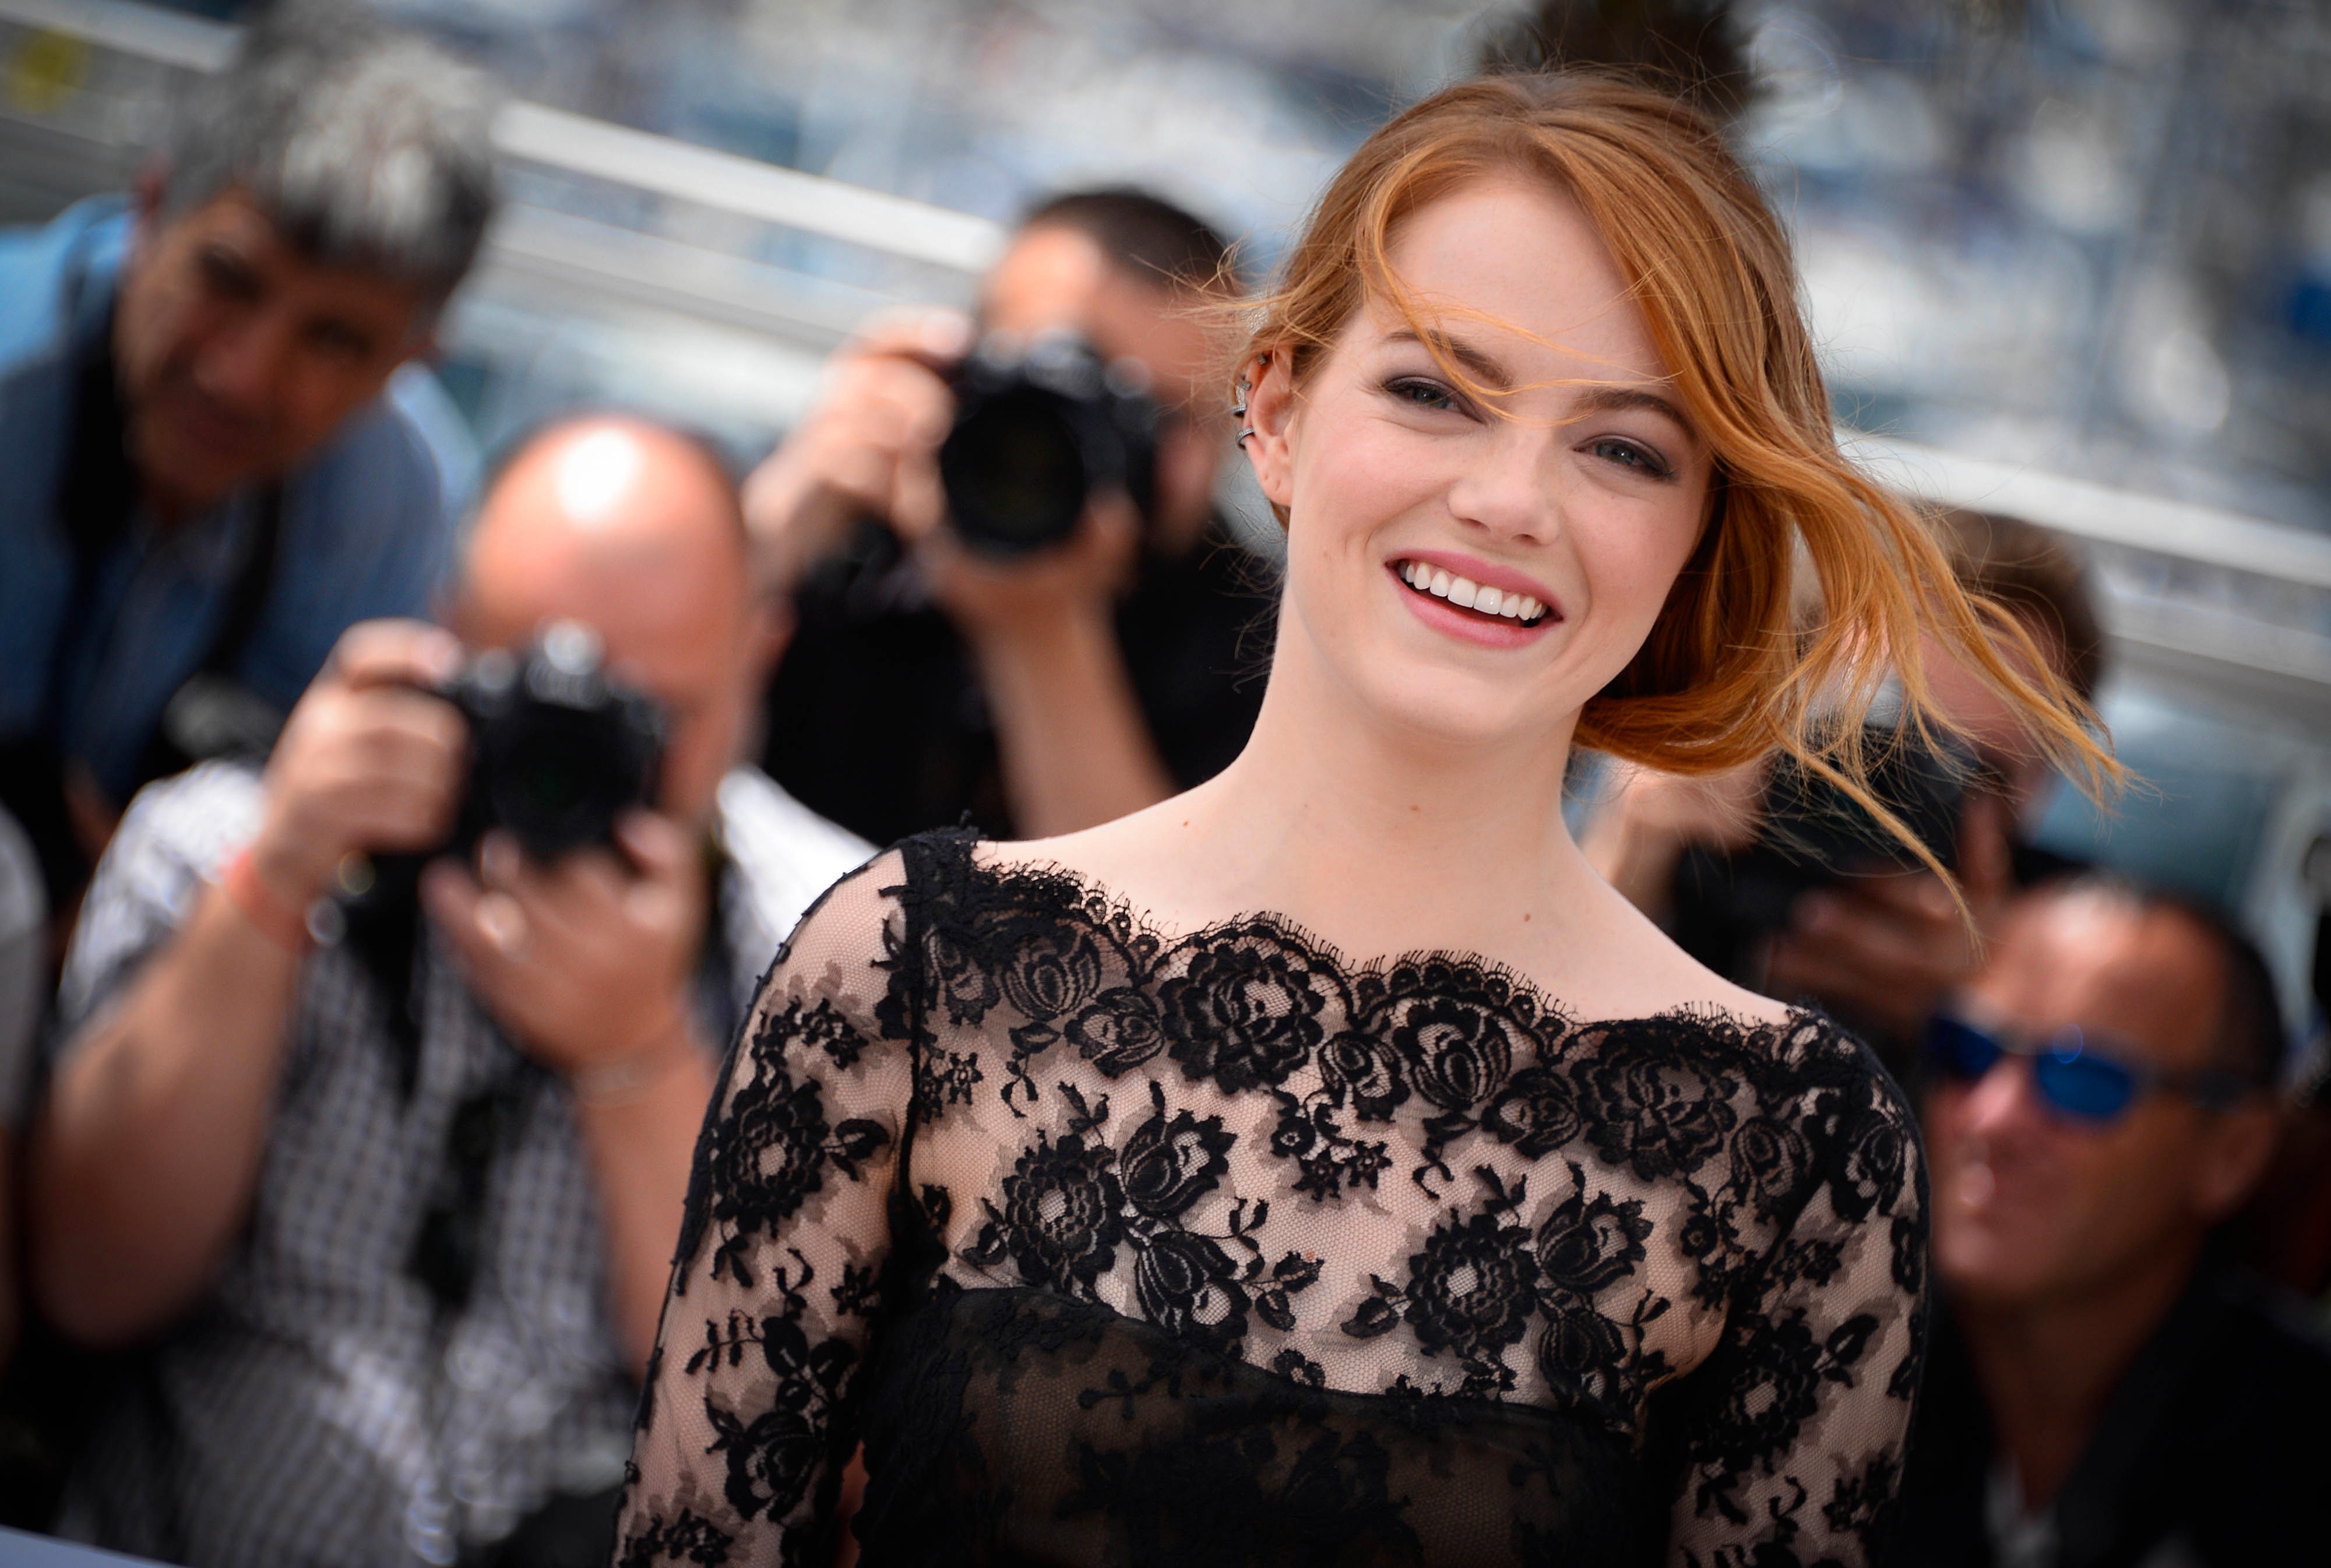 american, celebrity, emma stone, actress, redhead, smile High Definition image